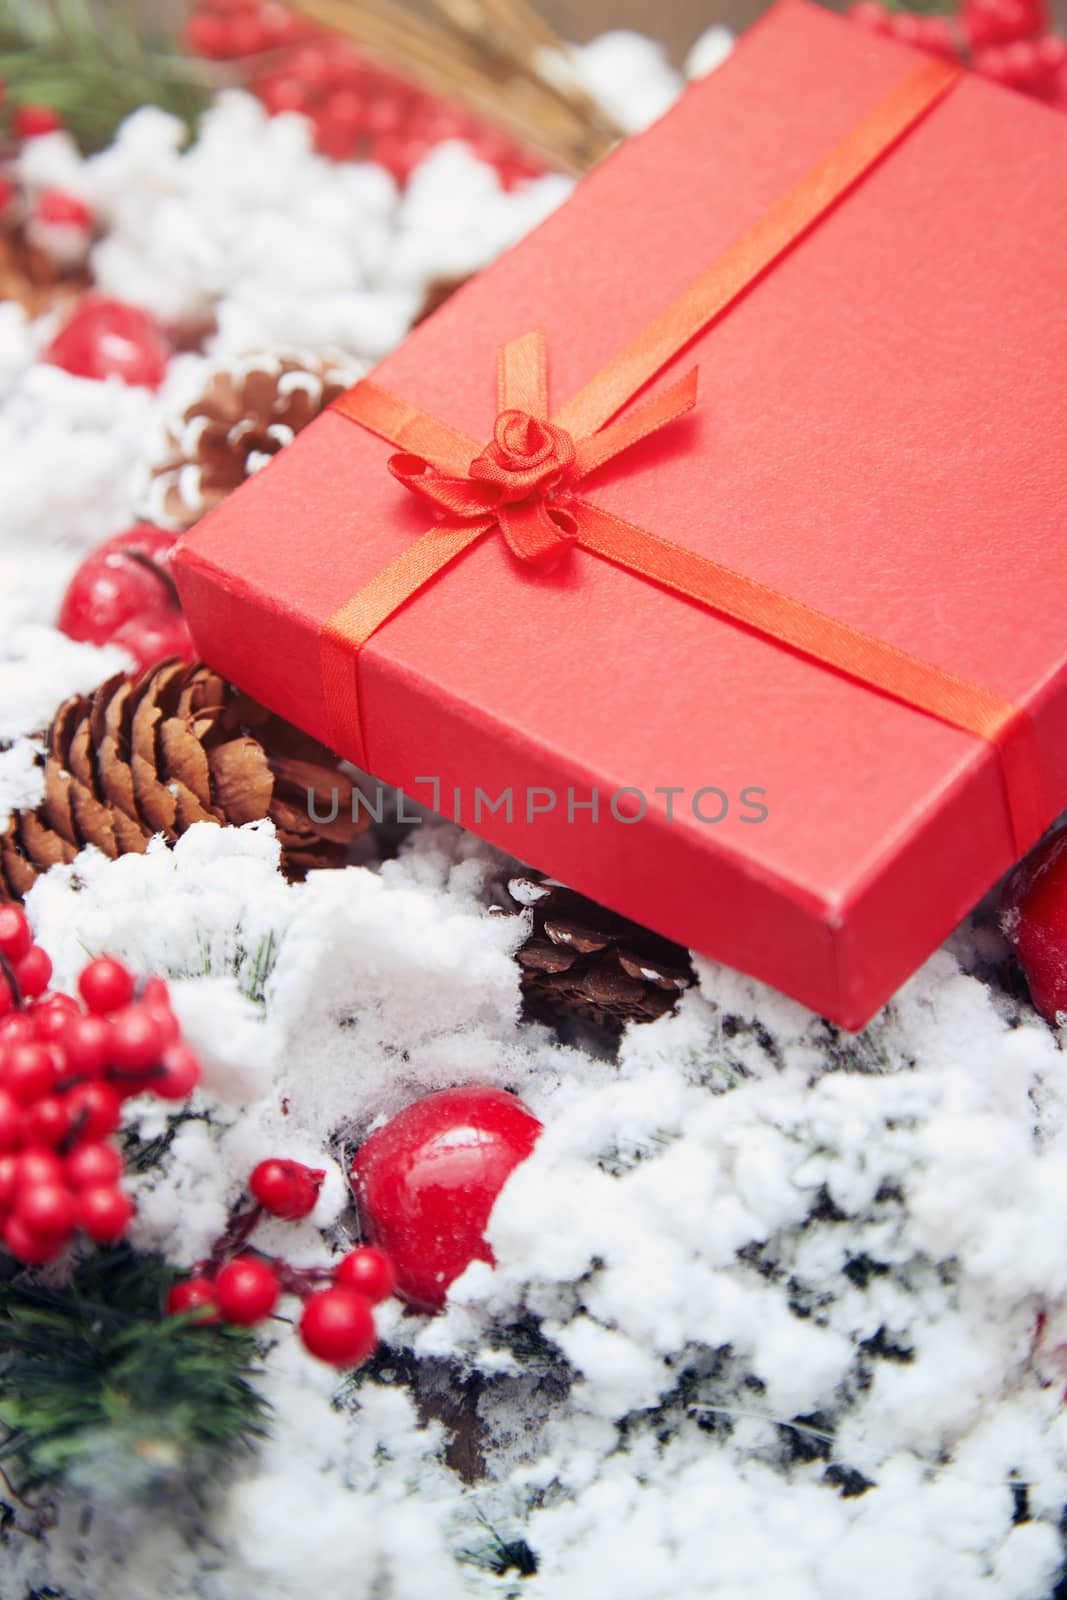 Christmas gift in a red box. Close-up horizontal photo